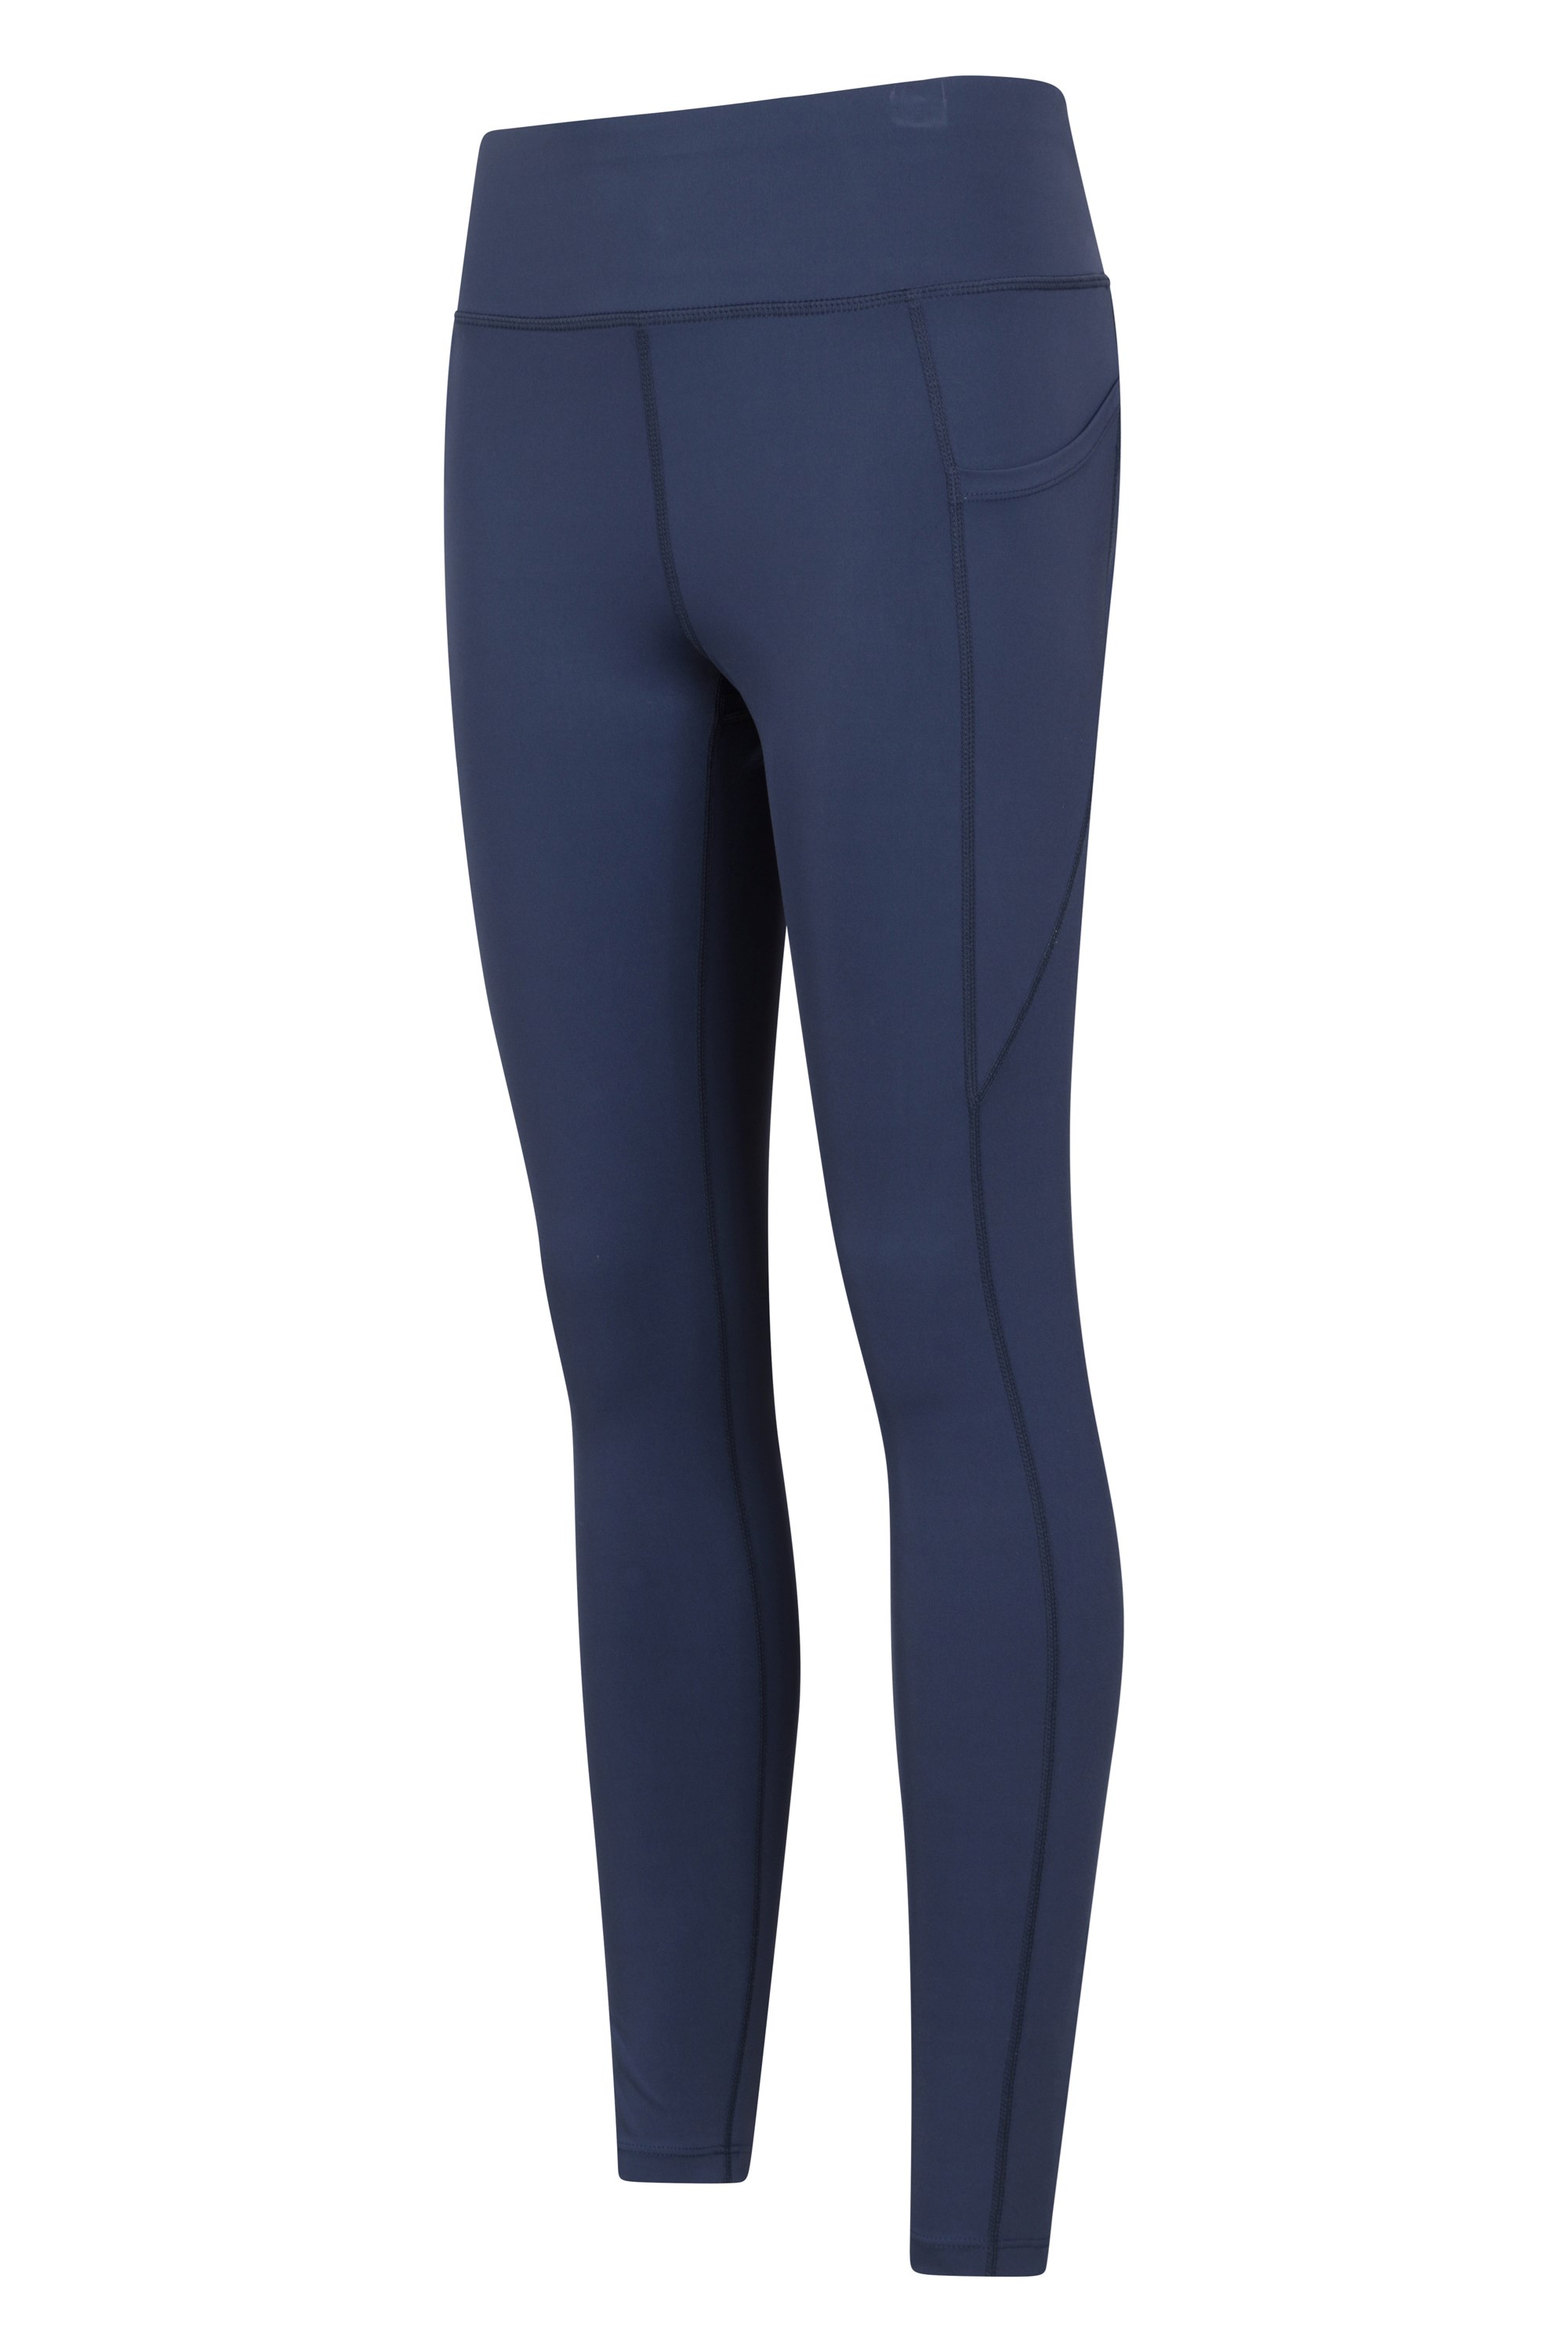 New with tags! SEGRILA High Waisted Compression Workout Leggings, Blac –  The Warehouse Liquidation